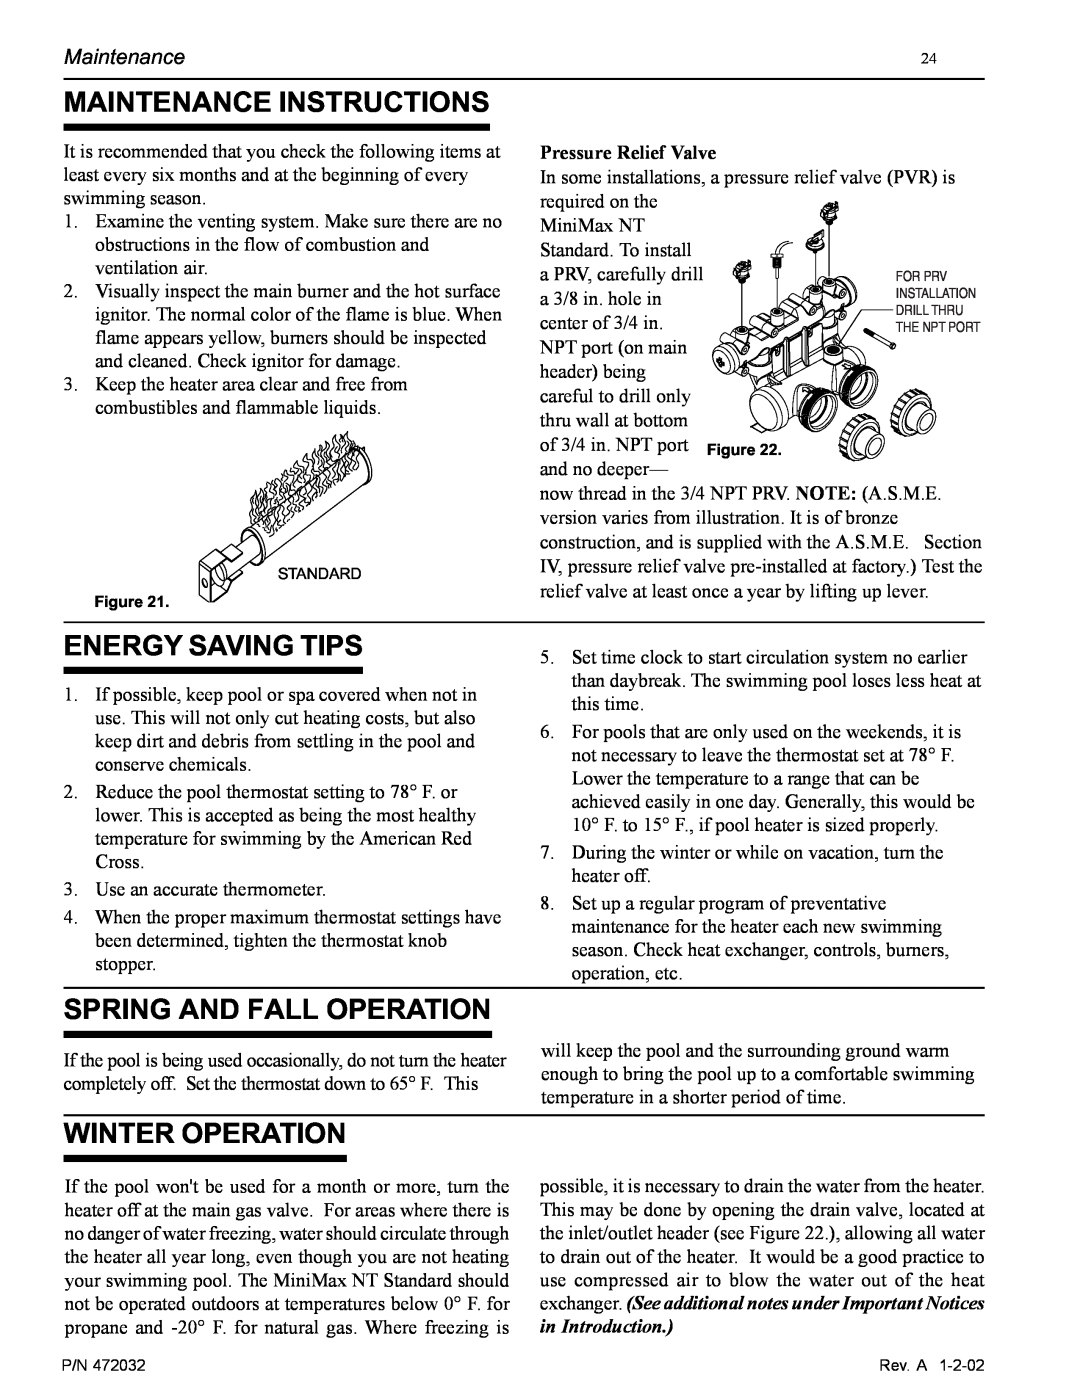 Pentair NT Standard Series Maintenance Instructions, Energy Saving Tips, Spring And Fall Operation, Winter Operation 